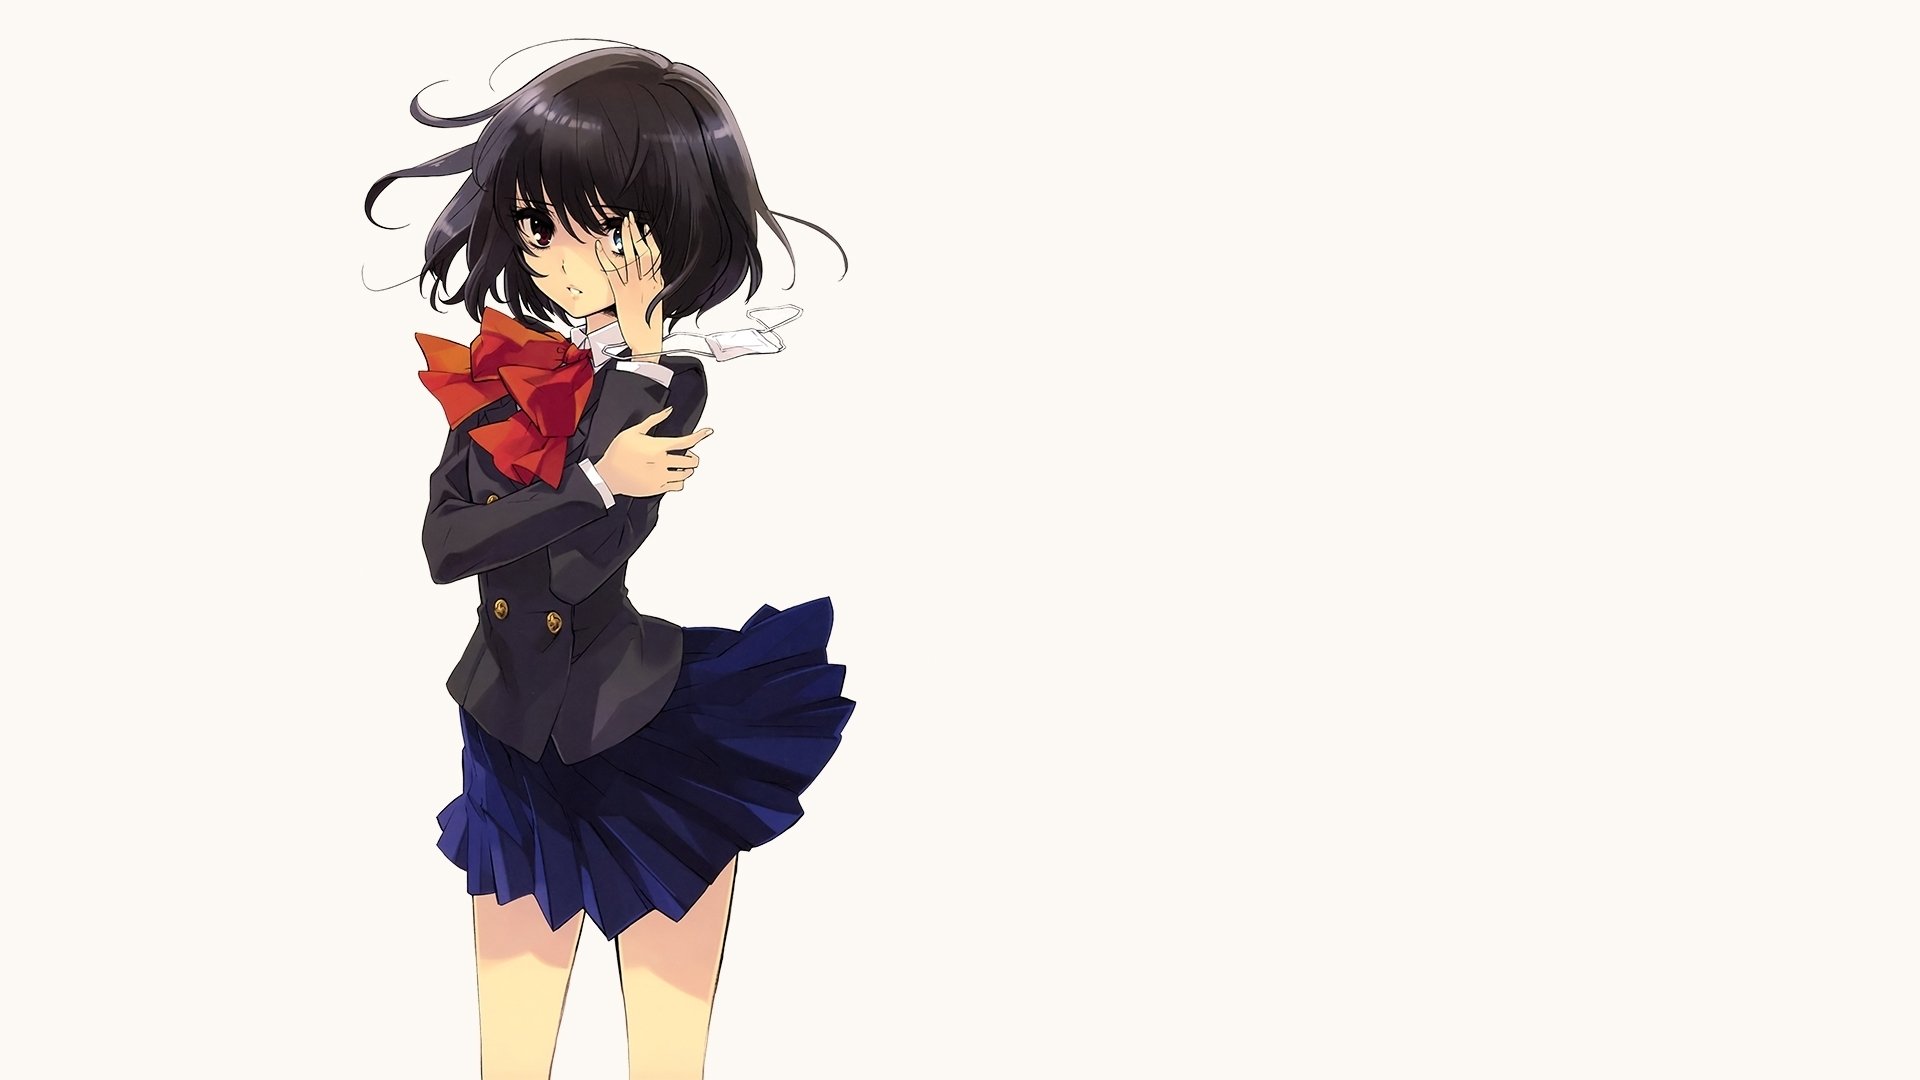 Mei misaki another anime series characters wallpaper, 1920x1080, 707159